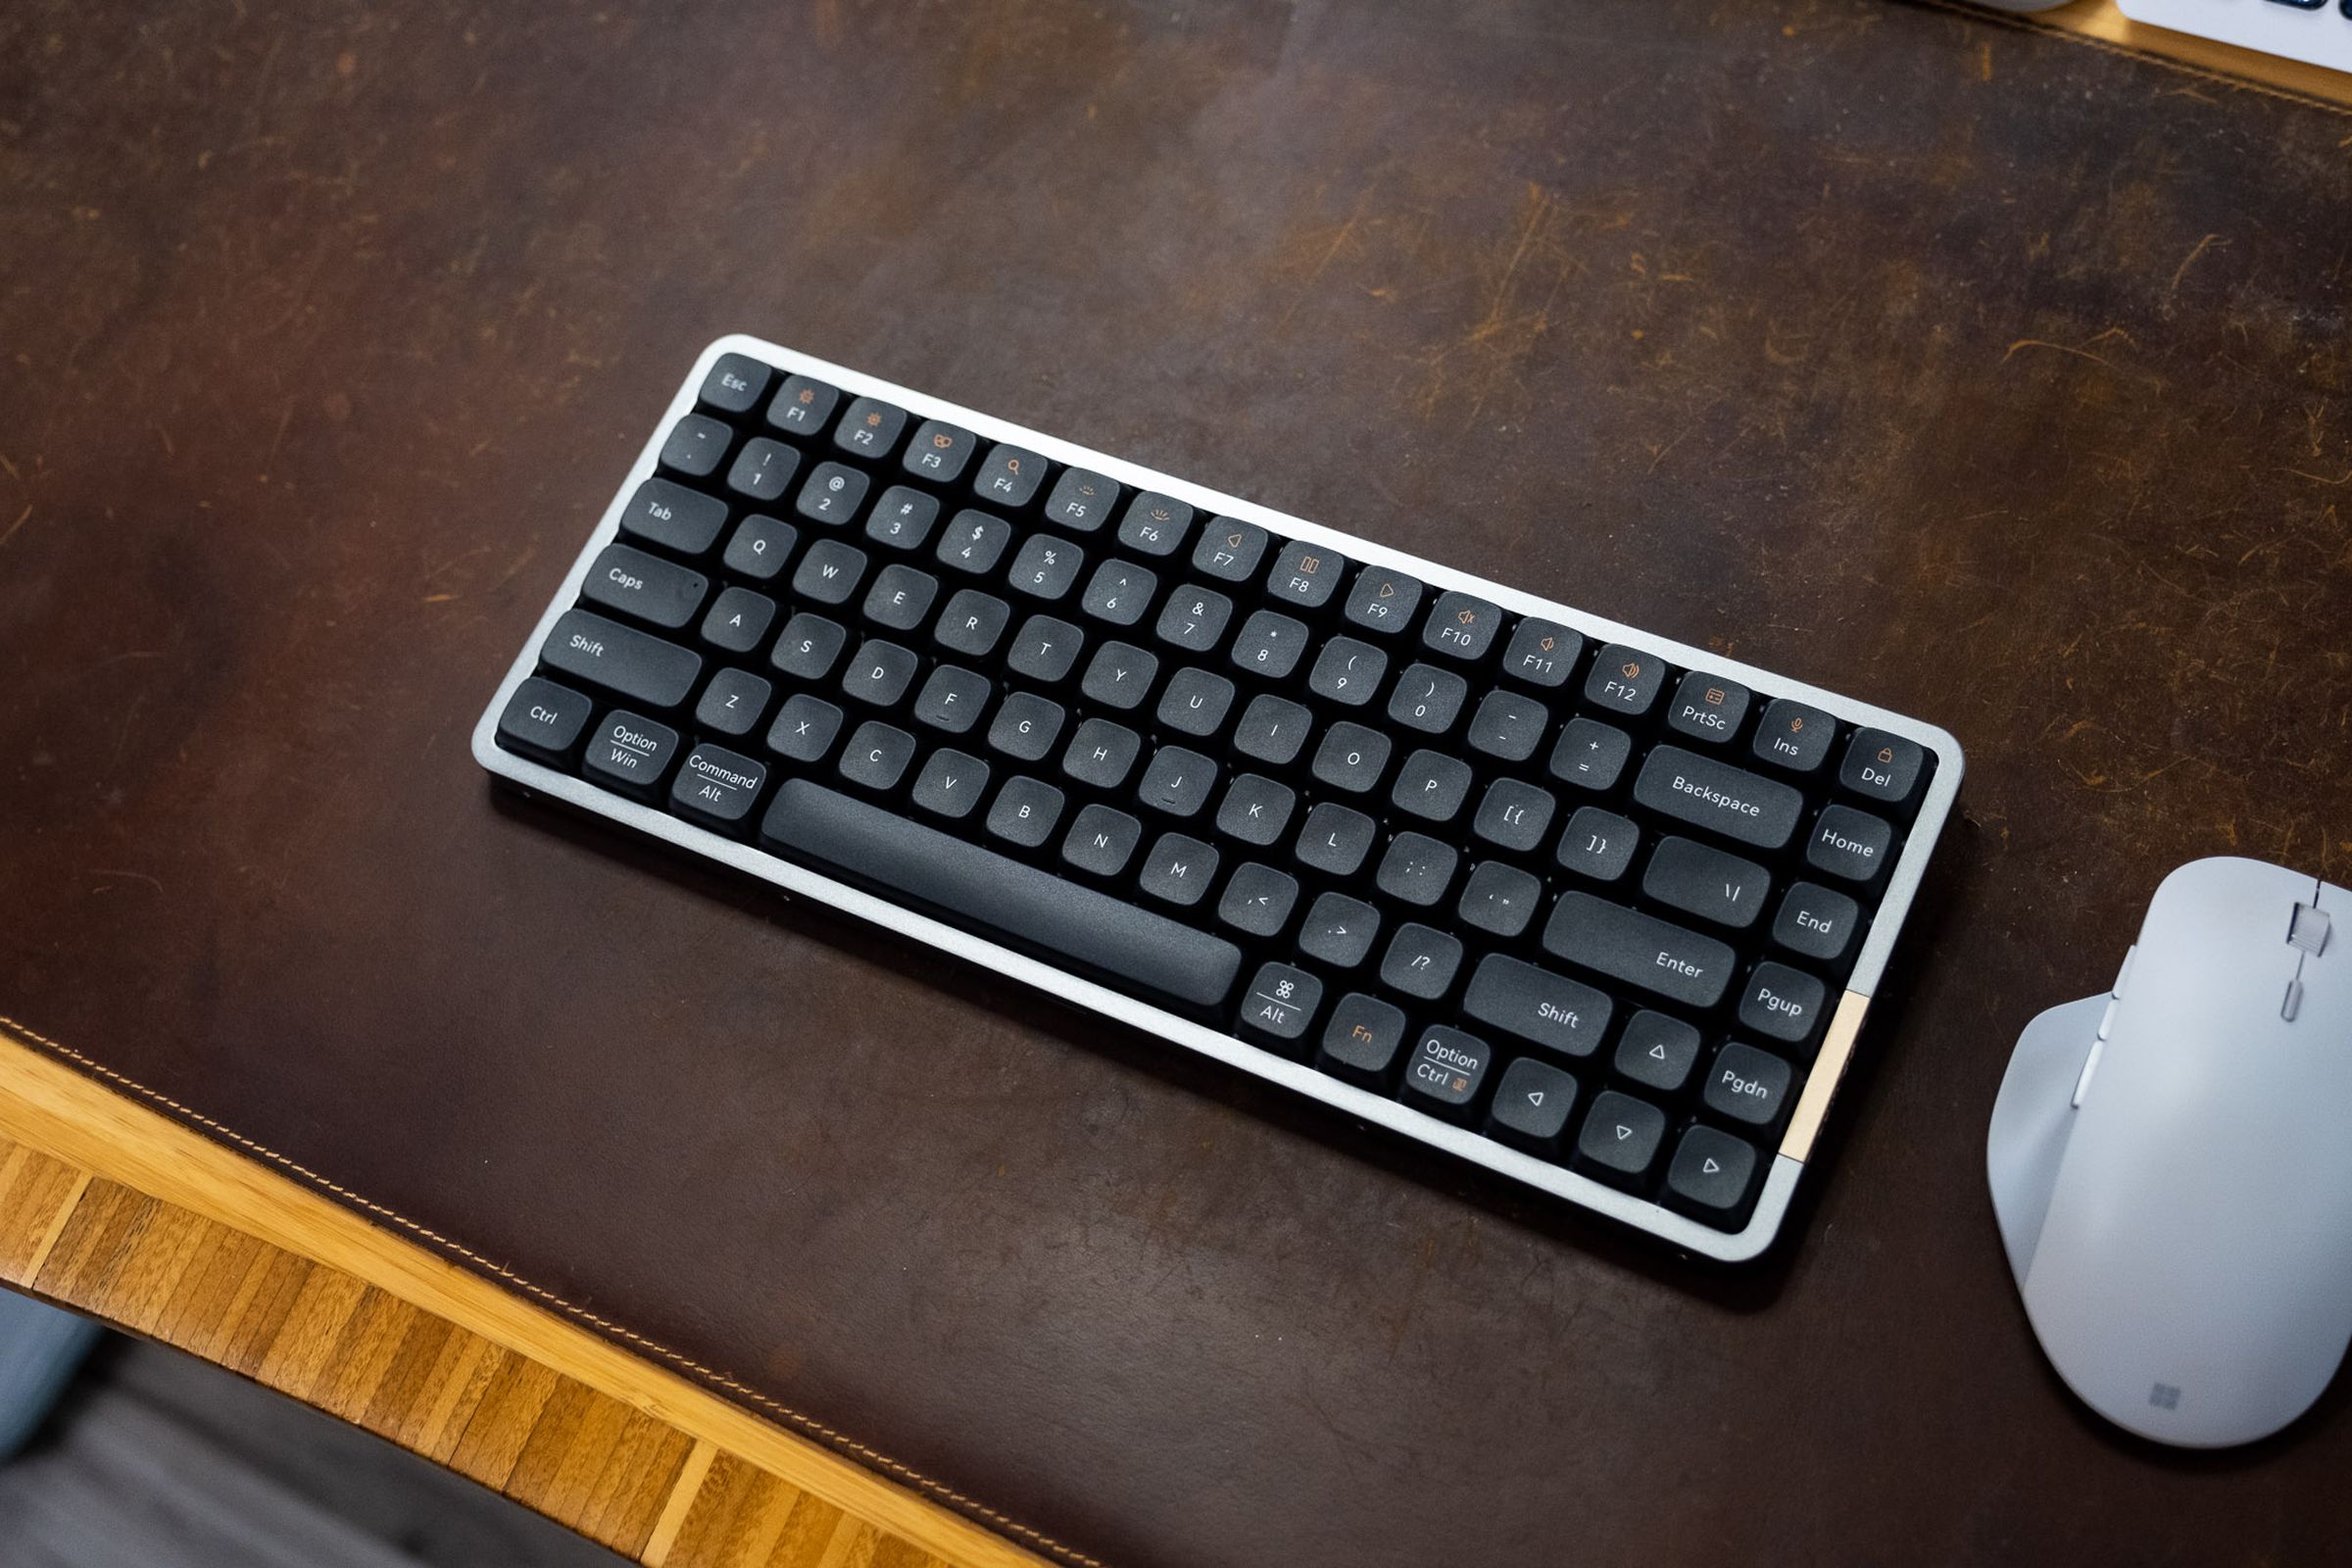 Lofree Flow keyboard on a brown deskmat, viewed from above.